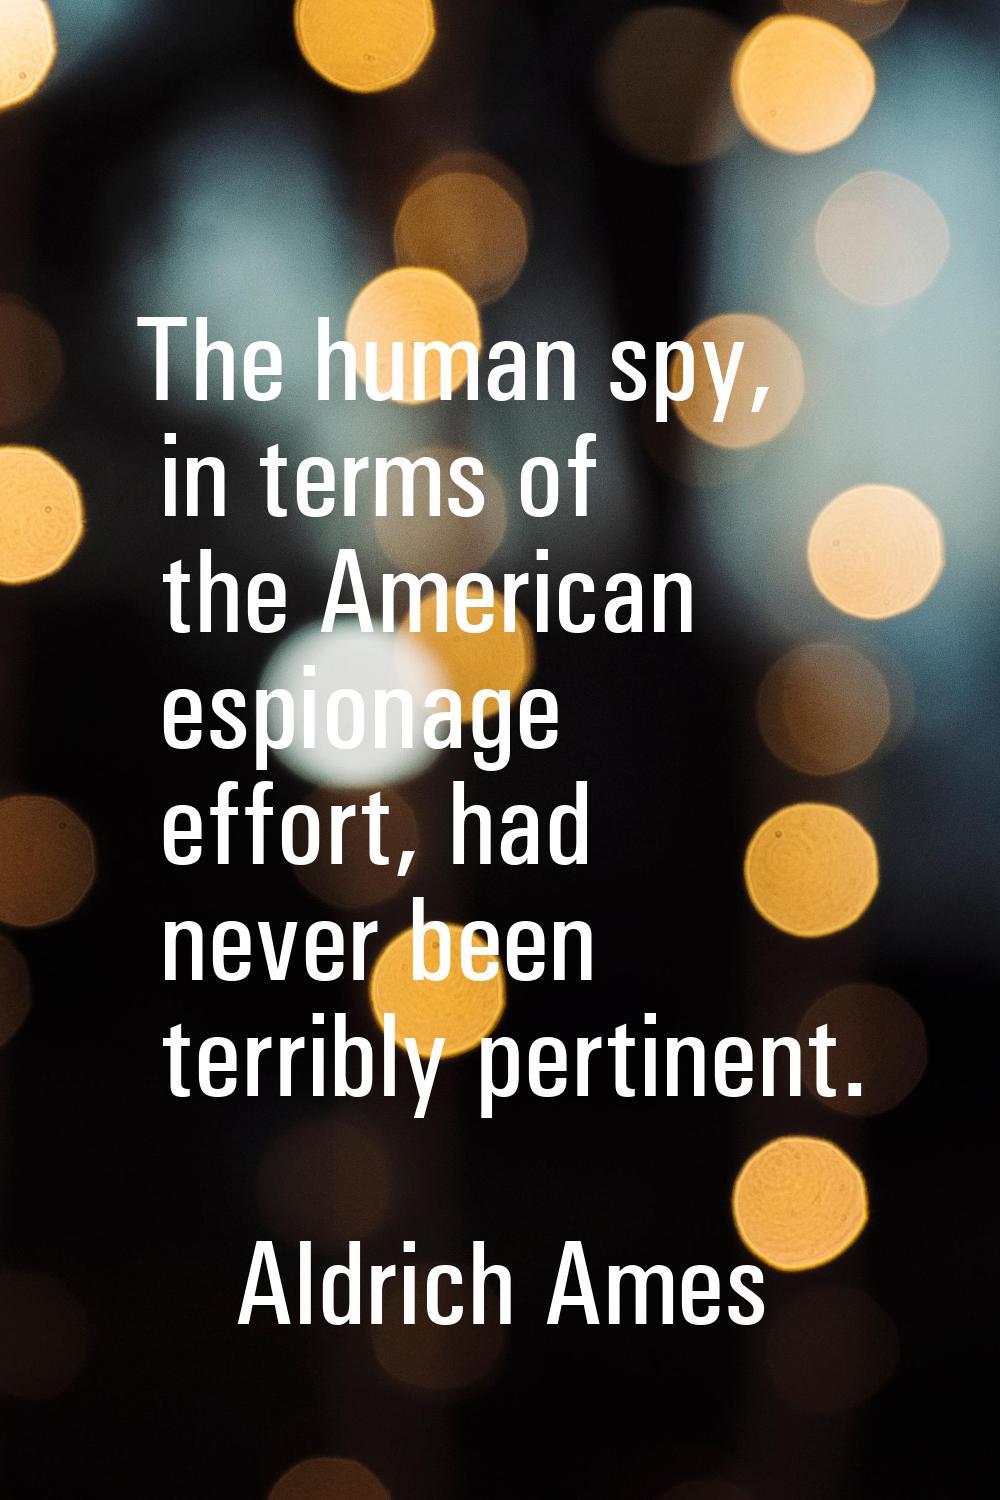 The human spy, in terms of the American espionage effort, had never been terribly pertinent.